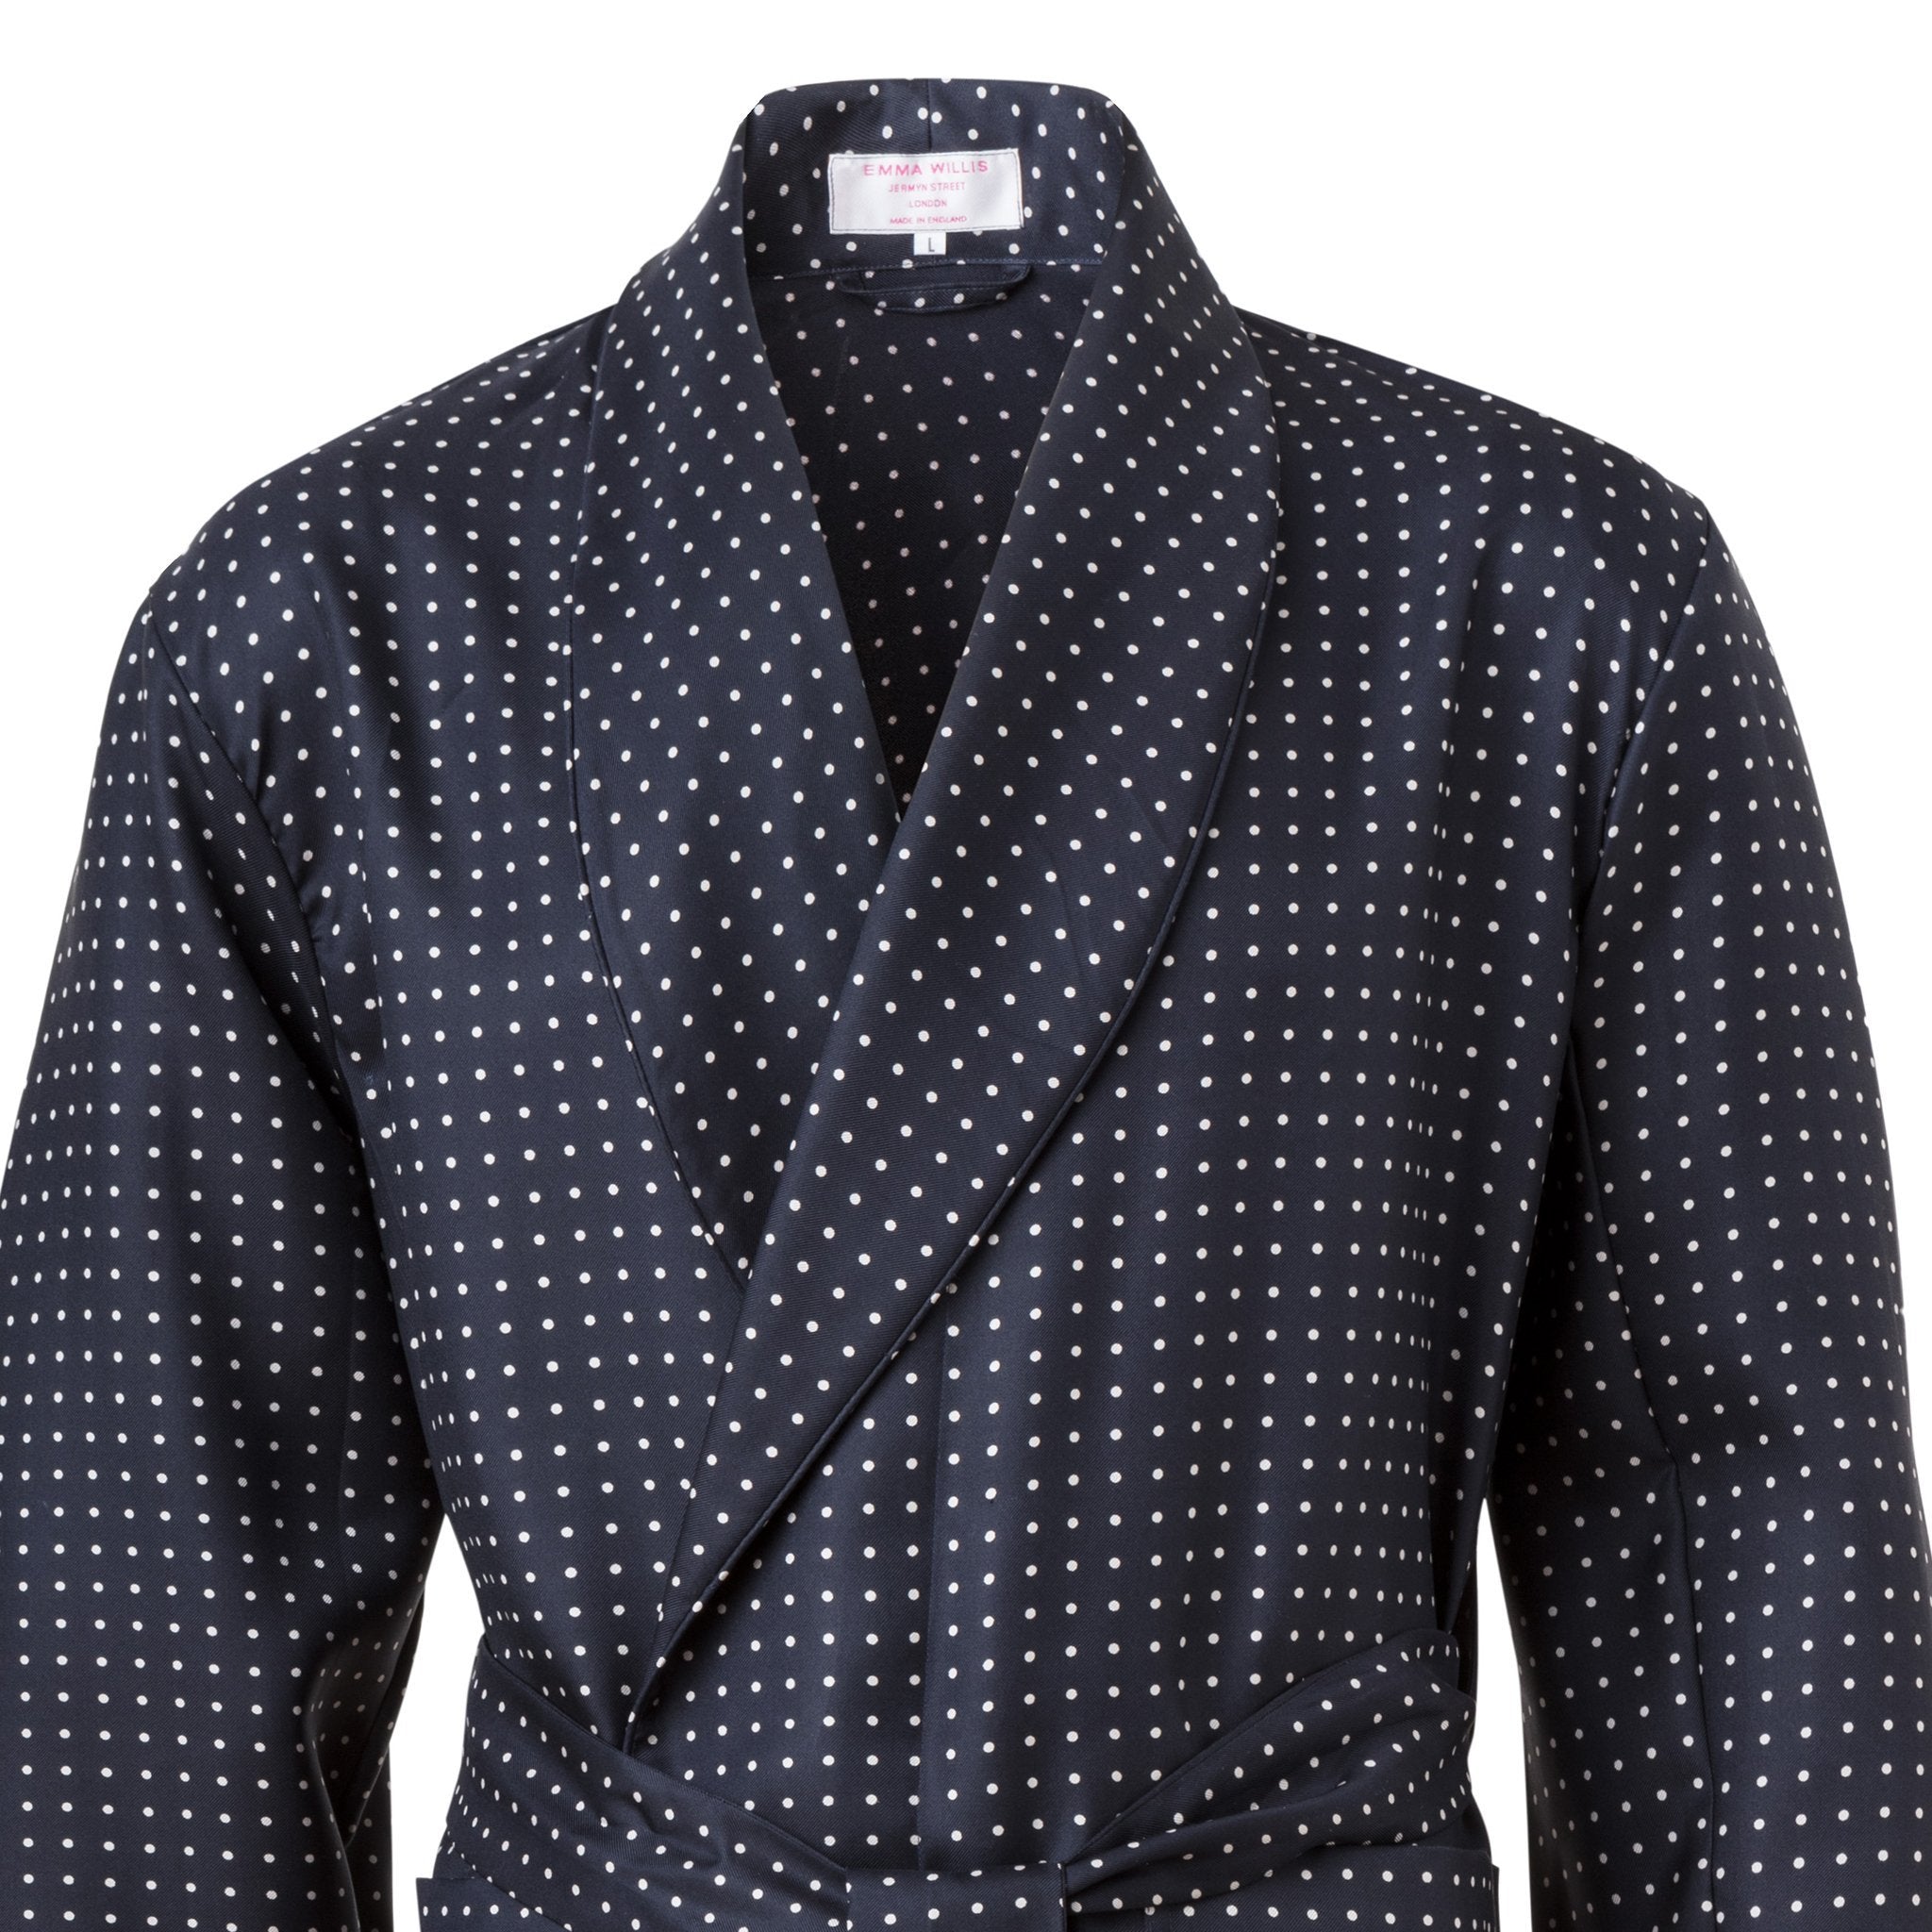 Navy and White Spot Silk Dressing Gown freeshipping - Emma Willis